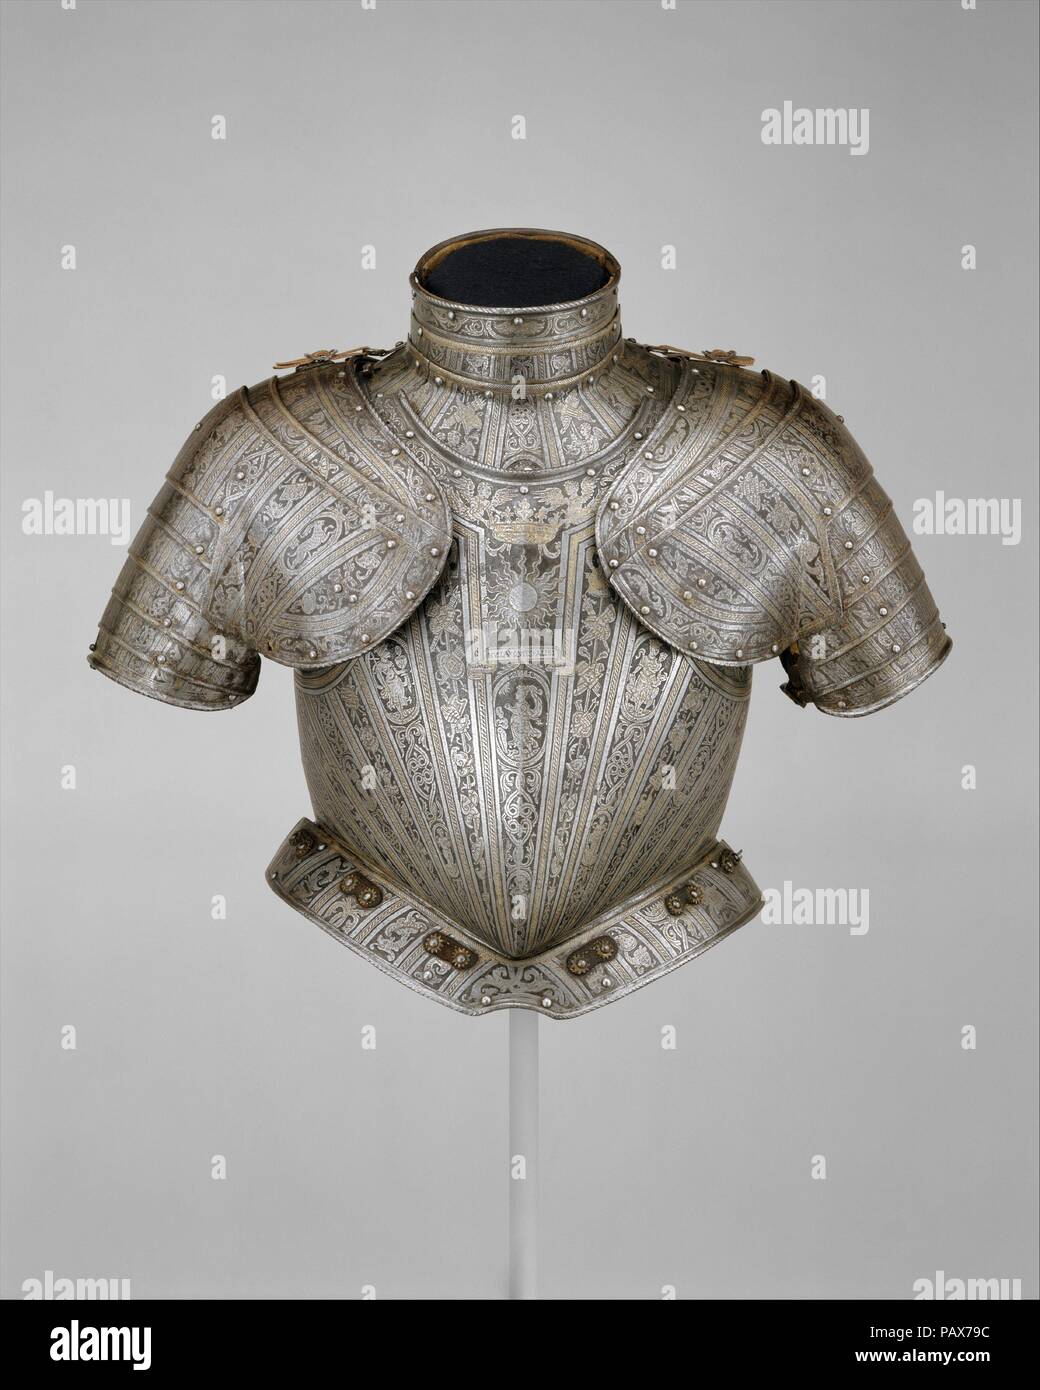 Portions of an Armor for   Vincenzo Luigi di Capua (d. 1627). Armorer: Pompeo della Cesa (Italian, Milan, ca. 1537-1610). Culture: Italian, Milan. Dimensions: H. as mounted 19 in. (48 cm). Date: ca. 1595.  These elements form part of a light-cavalry or infantry armor made for the Neapolitan nobleman Vincenzo Luigi di Capua (d. 1627), count of Altavilla and prince of Riccia. The breastplate bears his personal impresa (emblem), a sunburst above the motto Nulla Quies Alibi (No Repose But Here).  Pompeo della Cesa, whose etched signature 'Pompeo' is found near the top of the breastplate in the cen Stock Photo